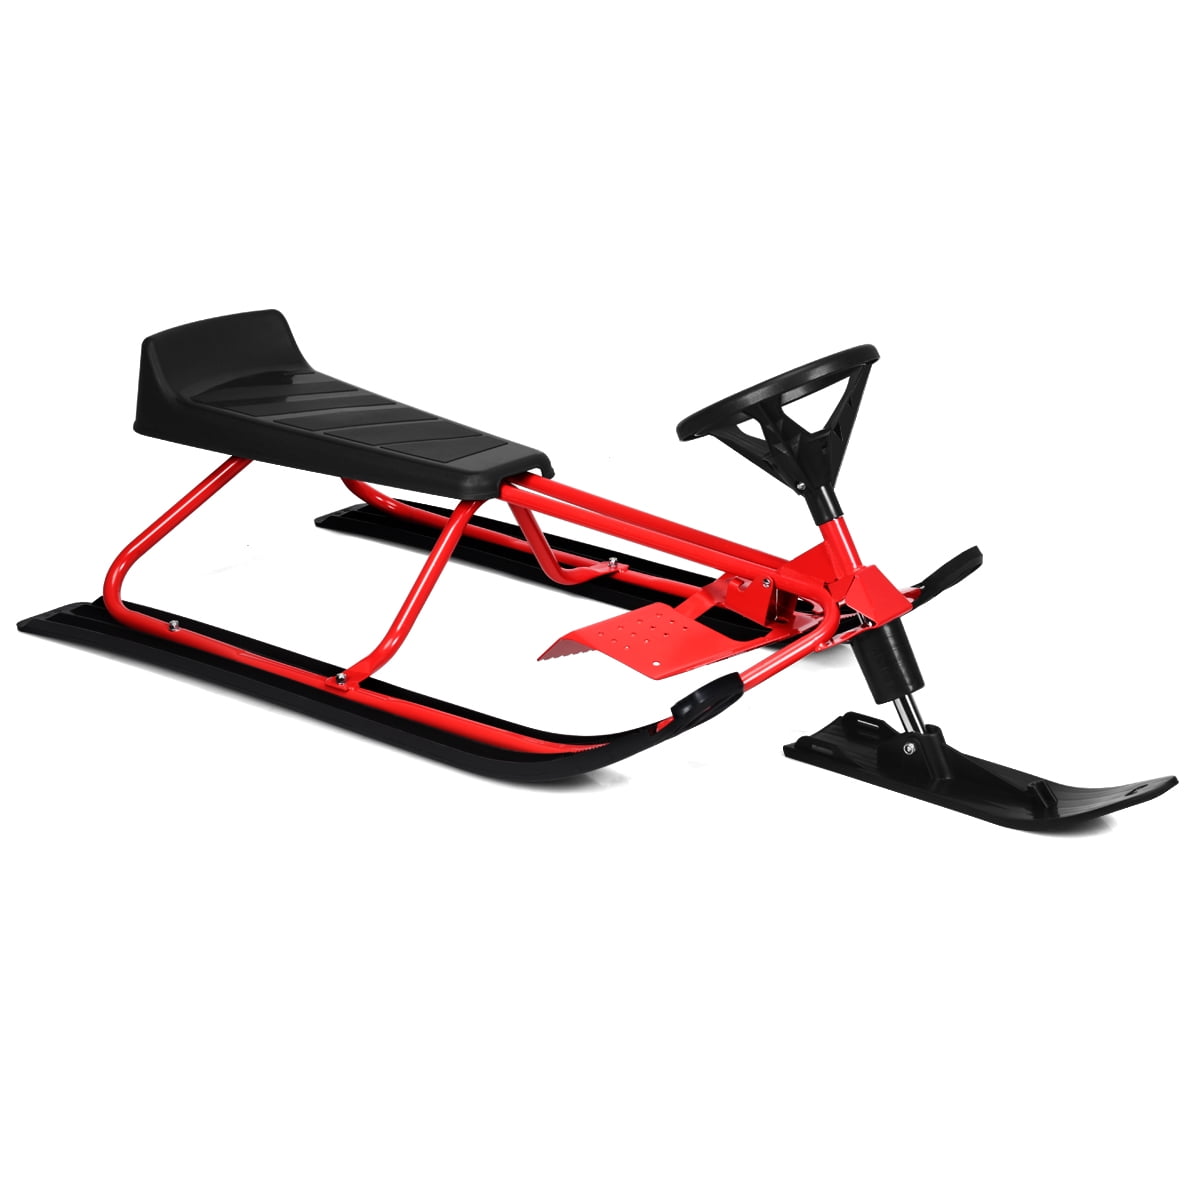 quality sled w high weight tolerance and quick assembly Tundra wolf sledge with steering twin brakes snow racer for two kids or a teenager 